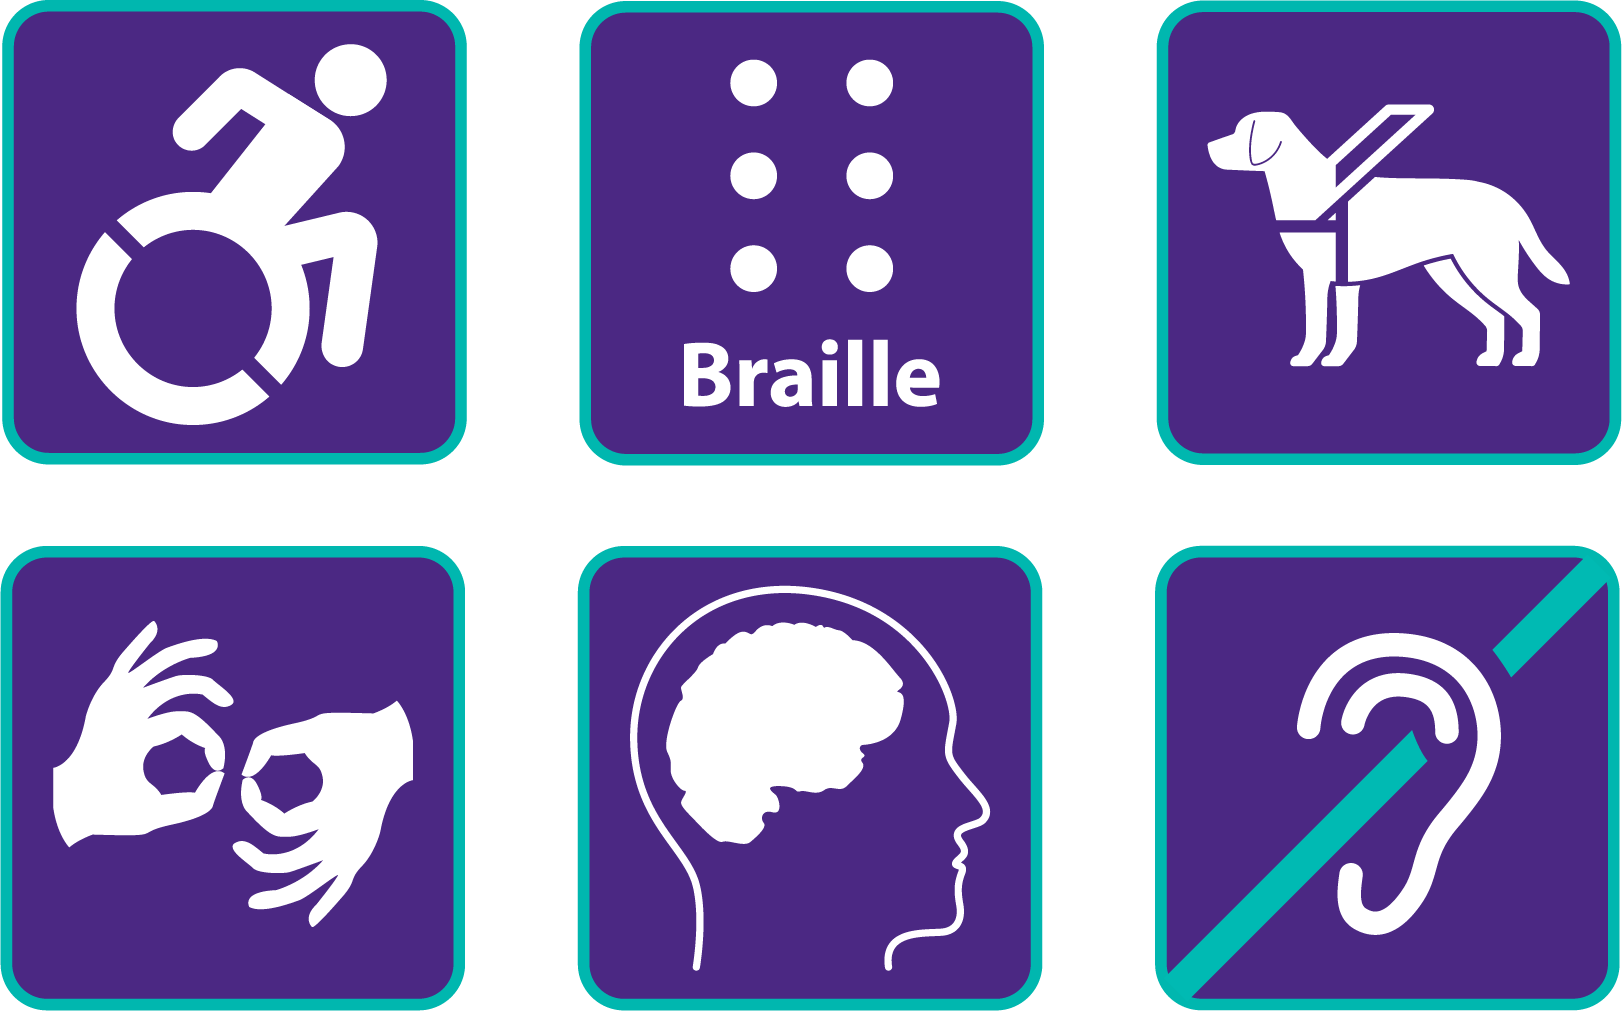 Purple and teal icons for wheelchair, braille, guide dog, sign language, mental impairment, and hearing impaired. 